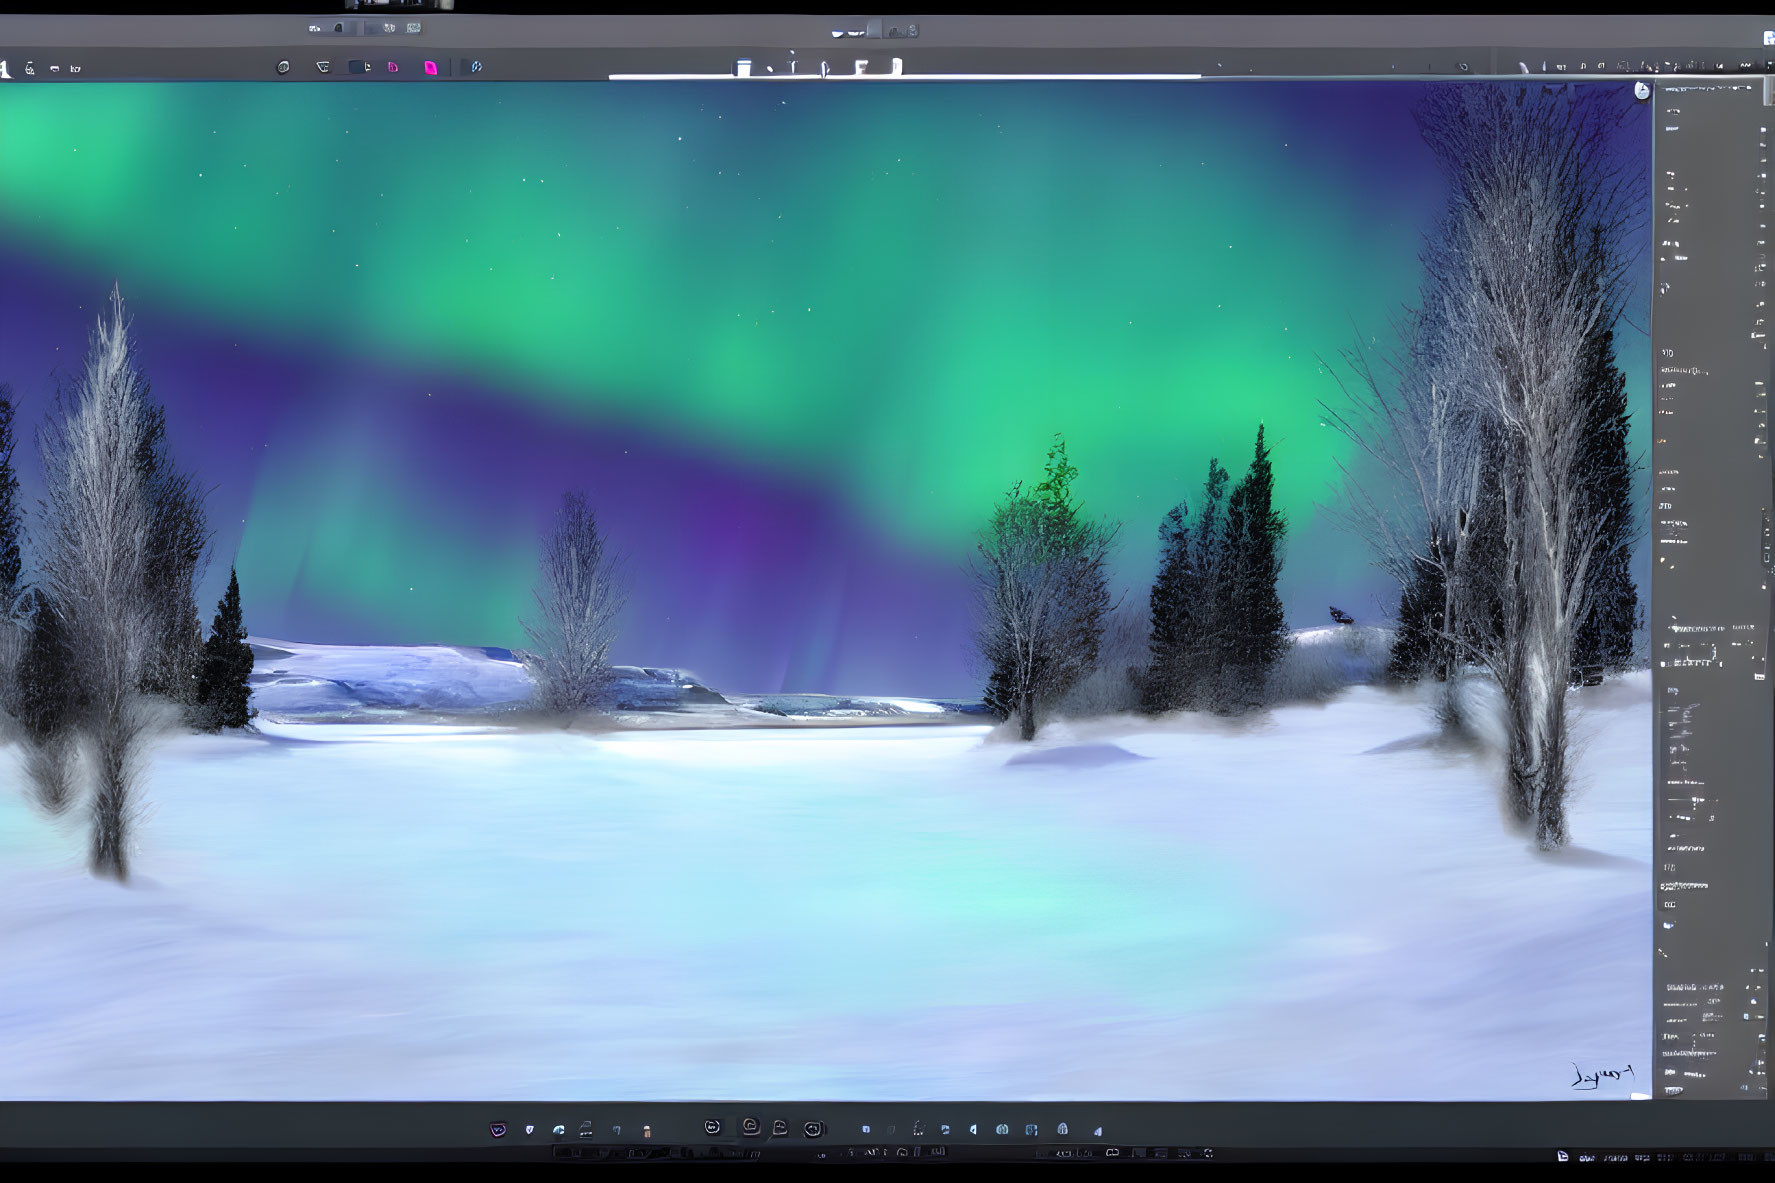 Digital snowy landscape under Northern Lights on computer screen with graphic editing software interface.